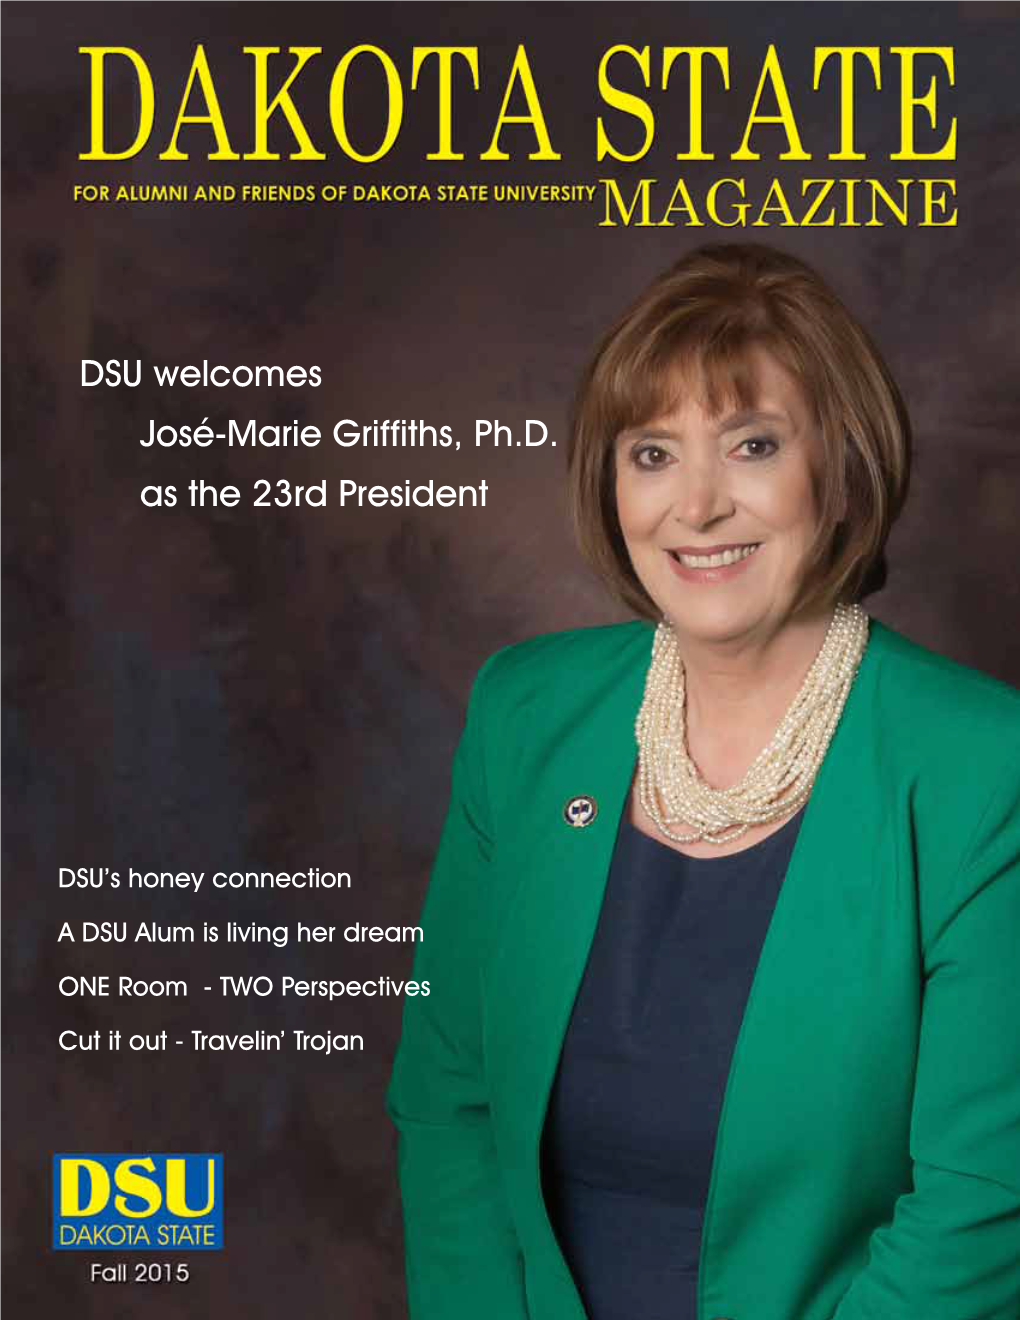 DSU Welcomes José-Marie Griffiths, Ph.D. As the 23Rd President